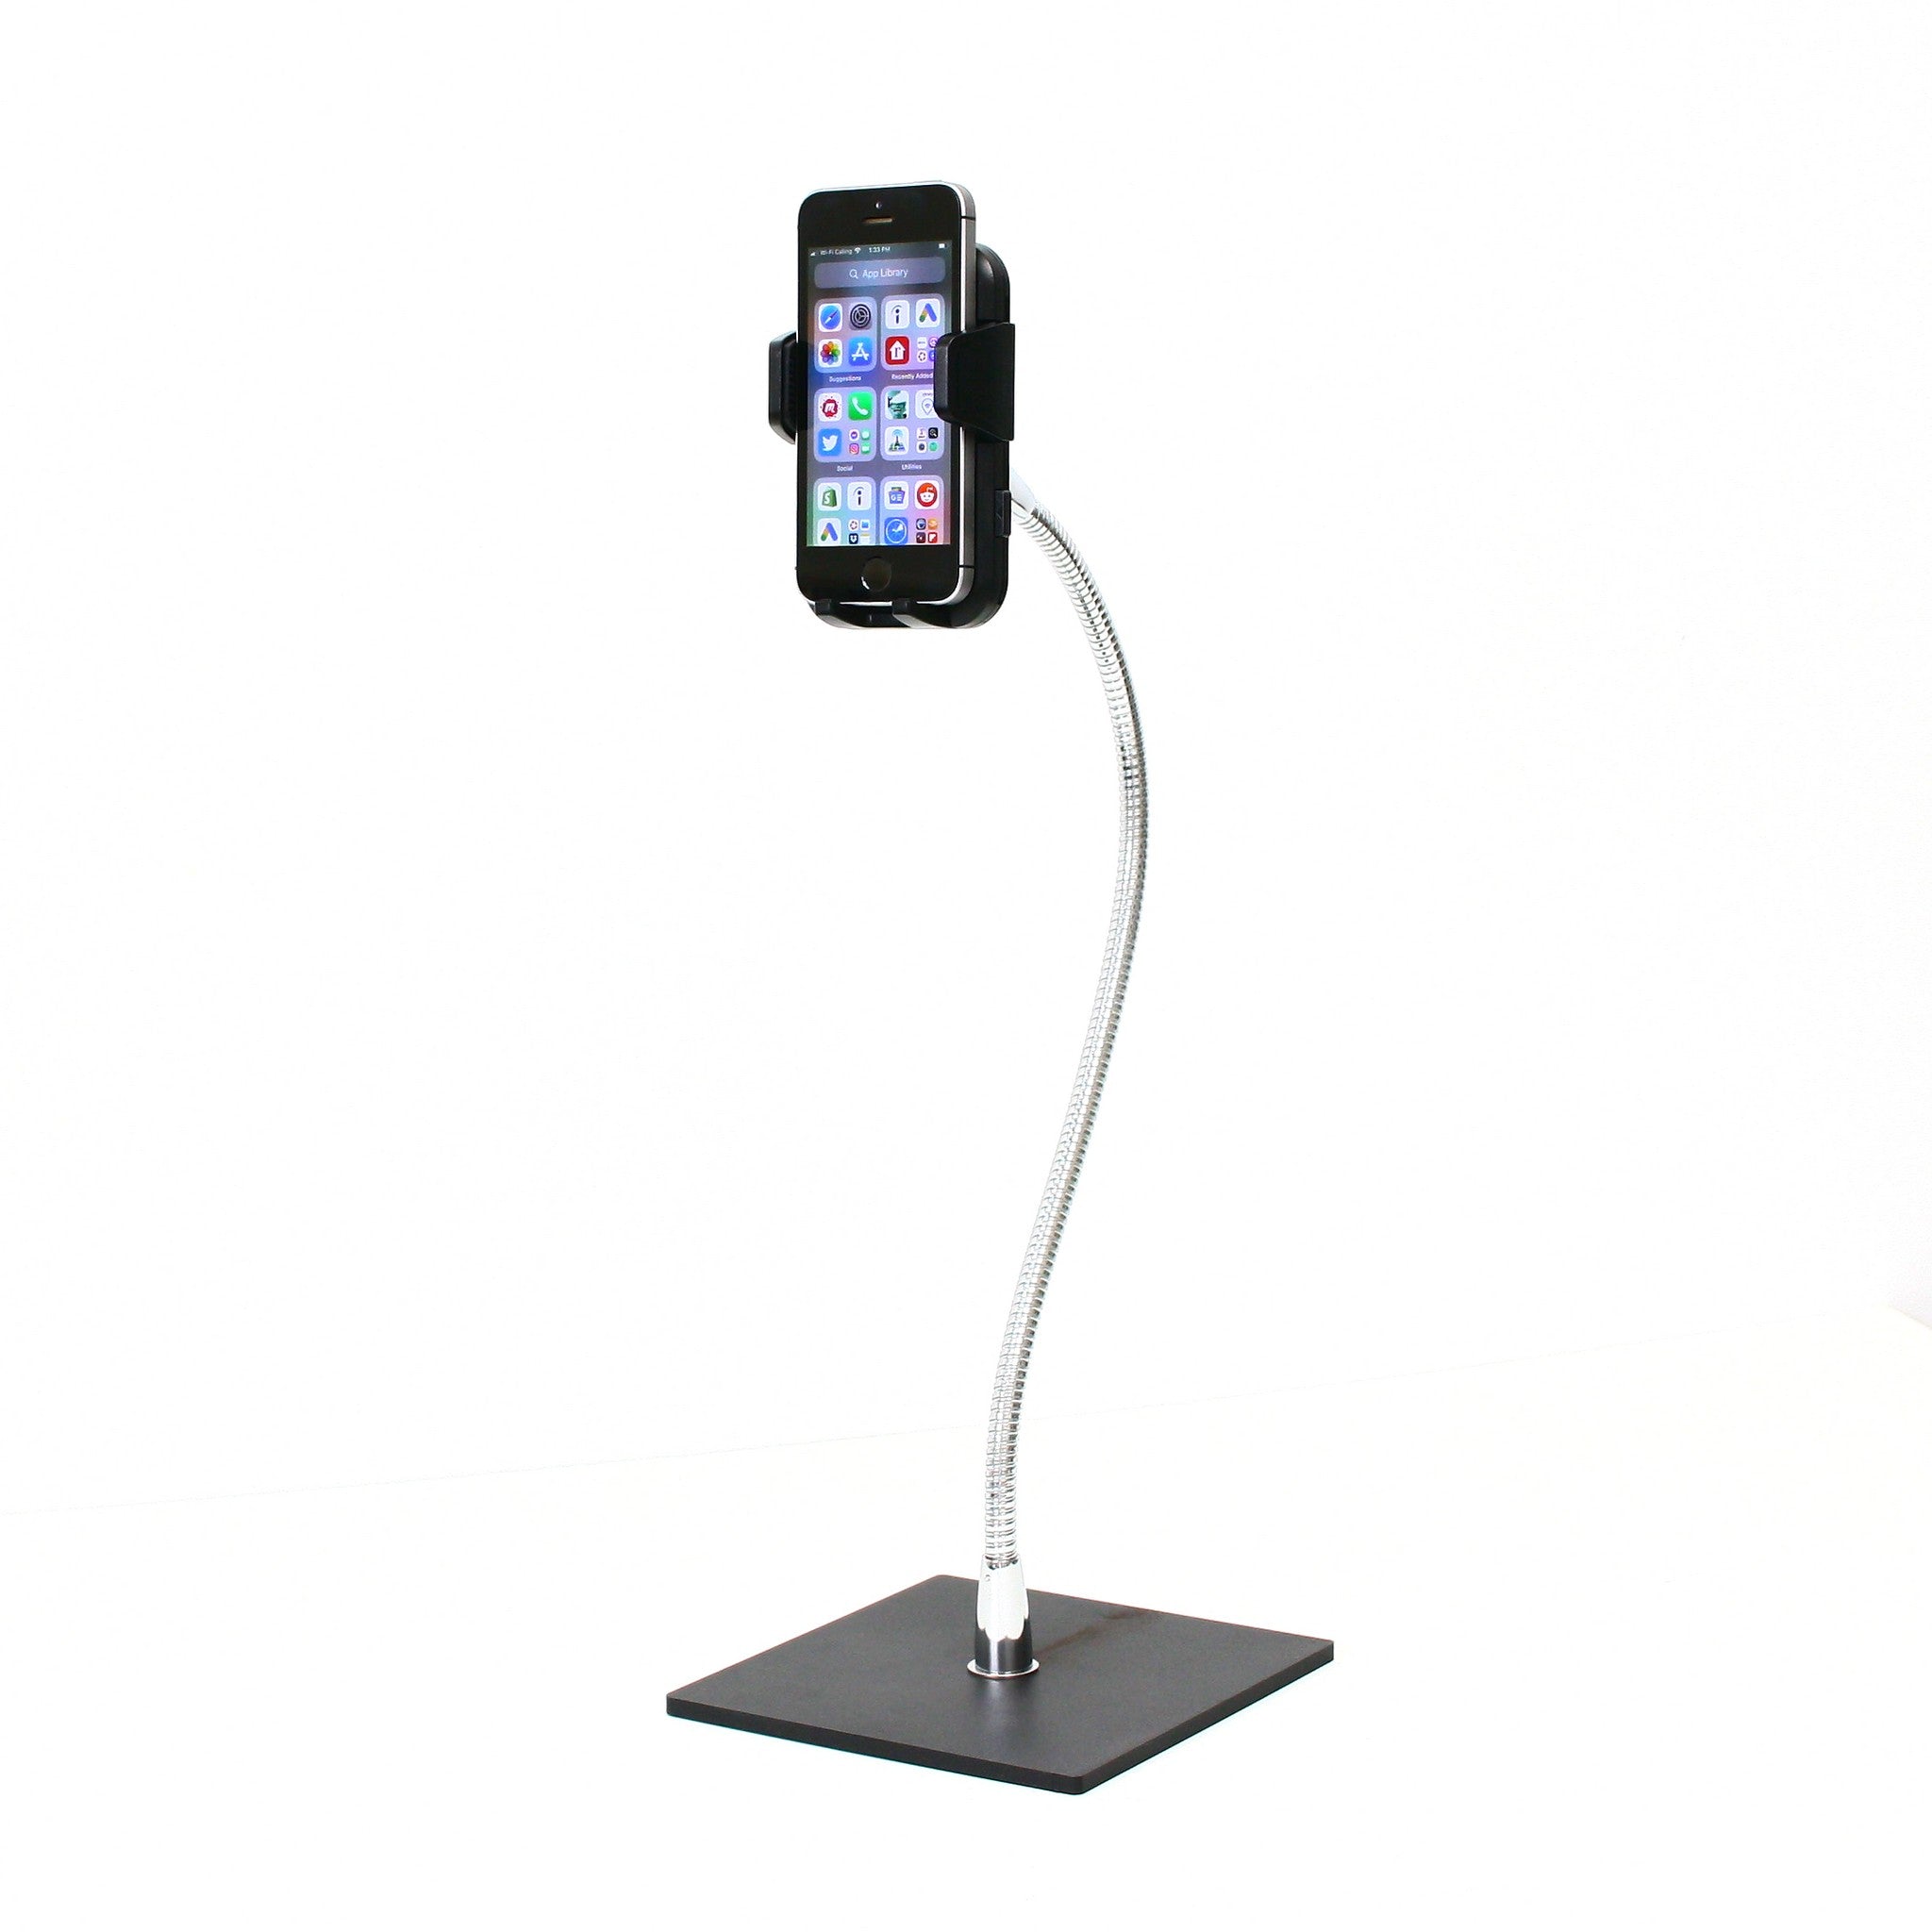 SnakeClamp 18 Medium-Light Duty Flexible Arm iPhone & Smartphone Stand  with Square Base